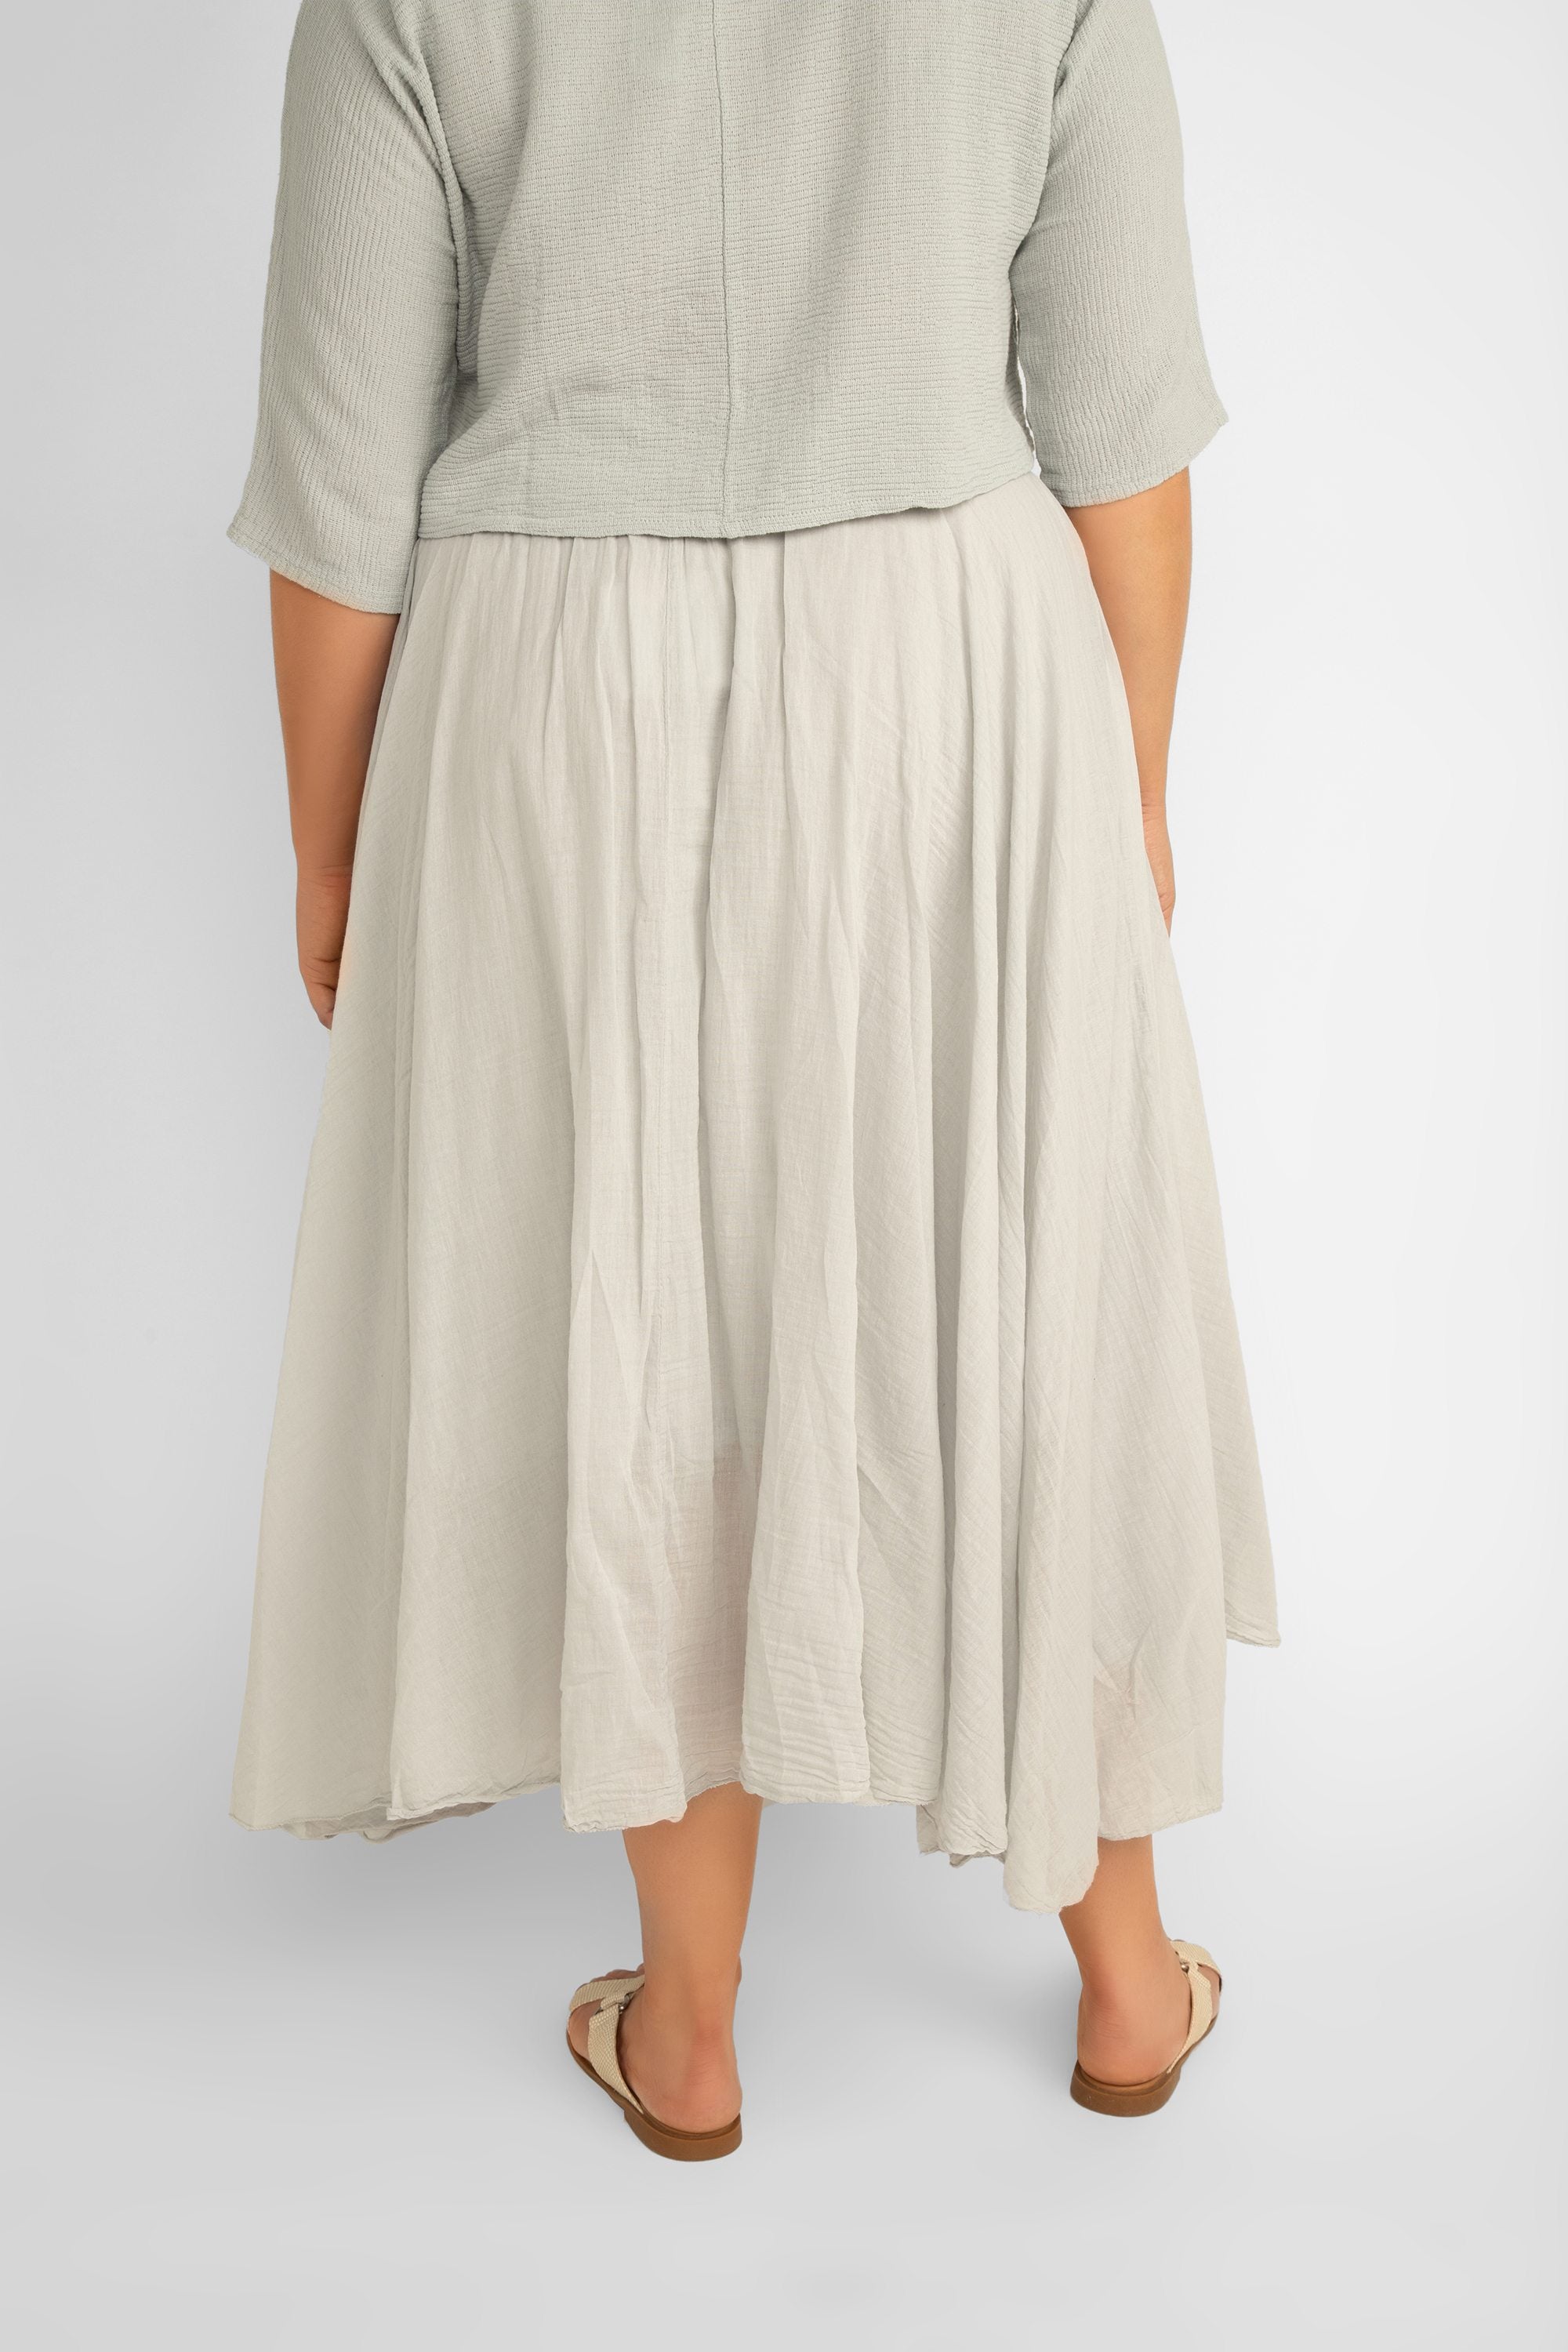 Back view of Me & Gee (L-6759) Flowy Cotton Maxi Skirt in Dove Grey